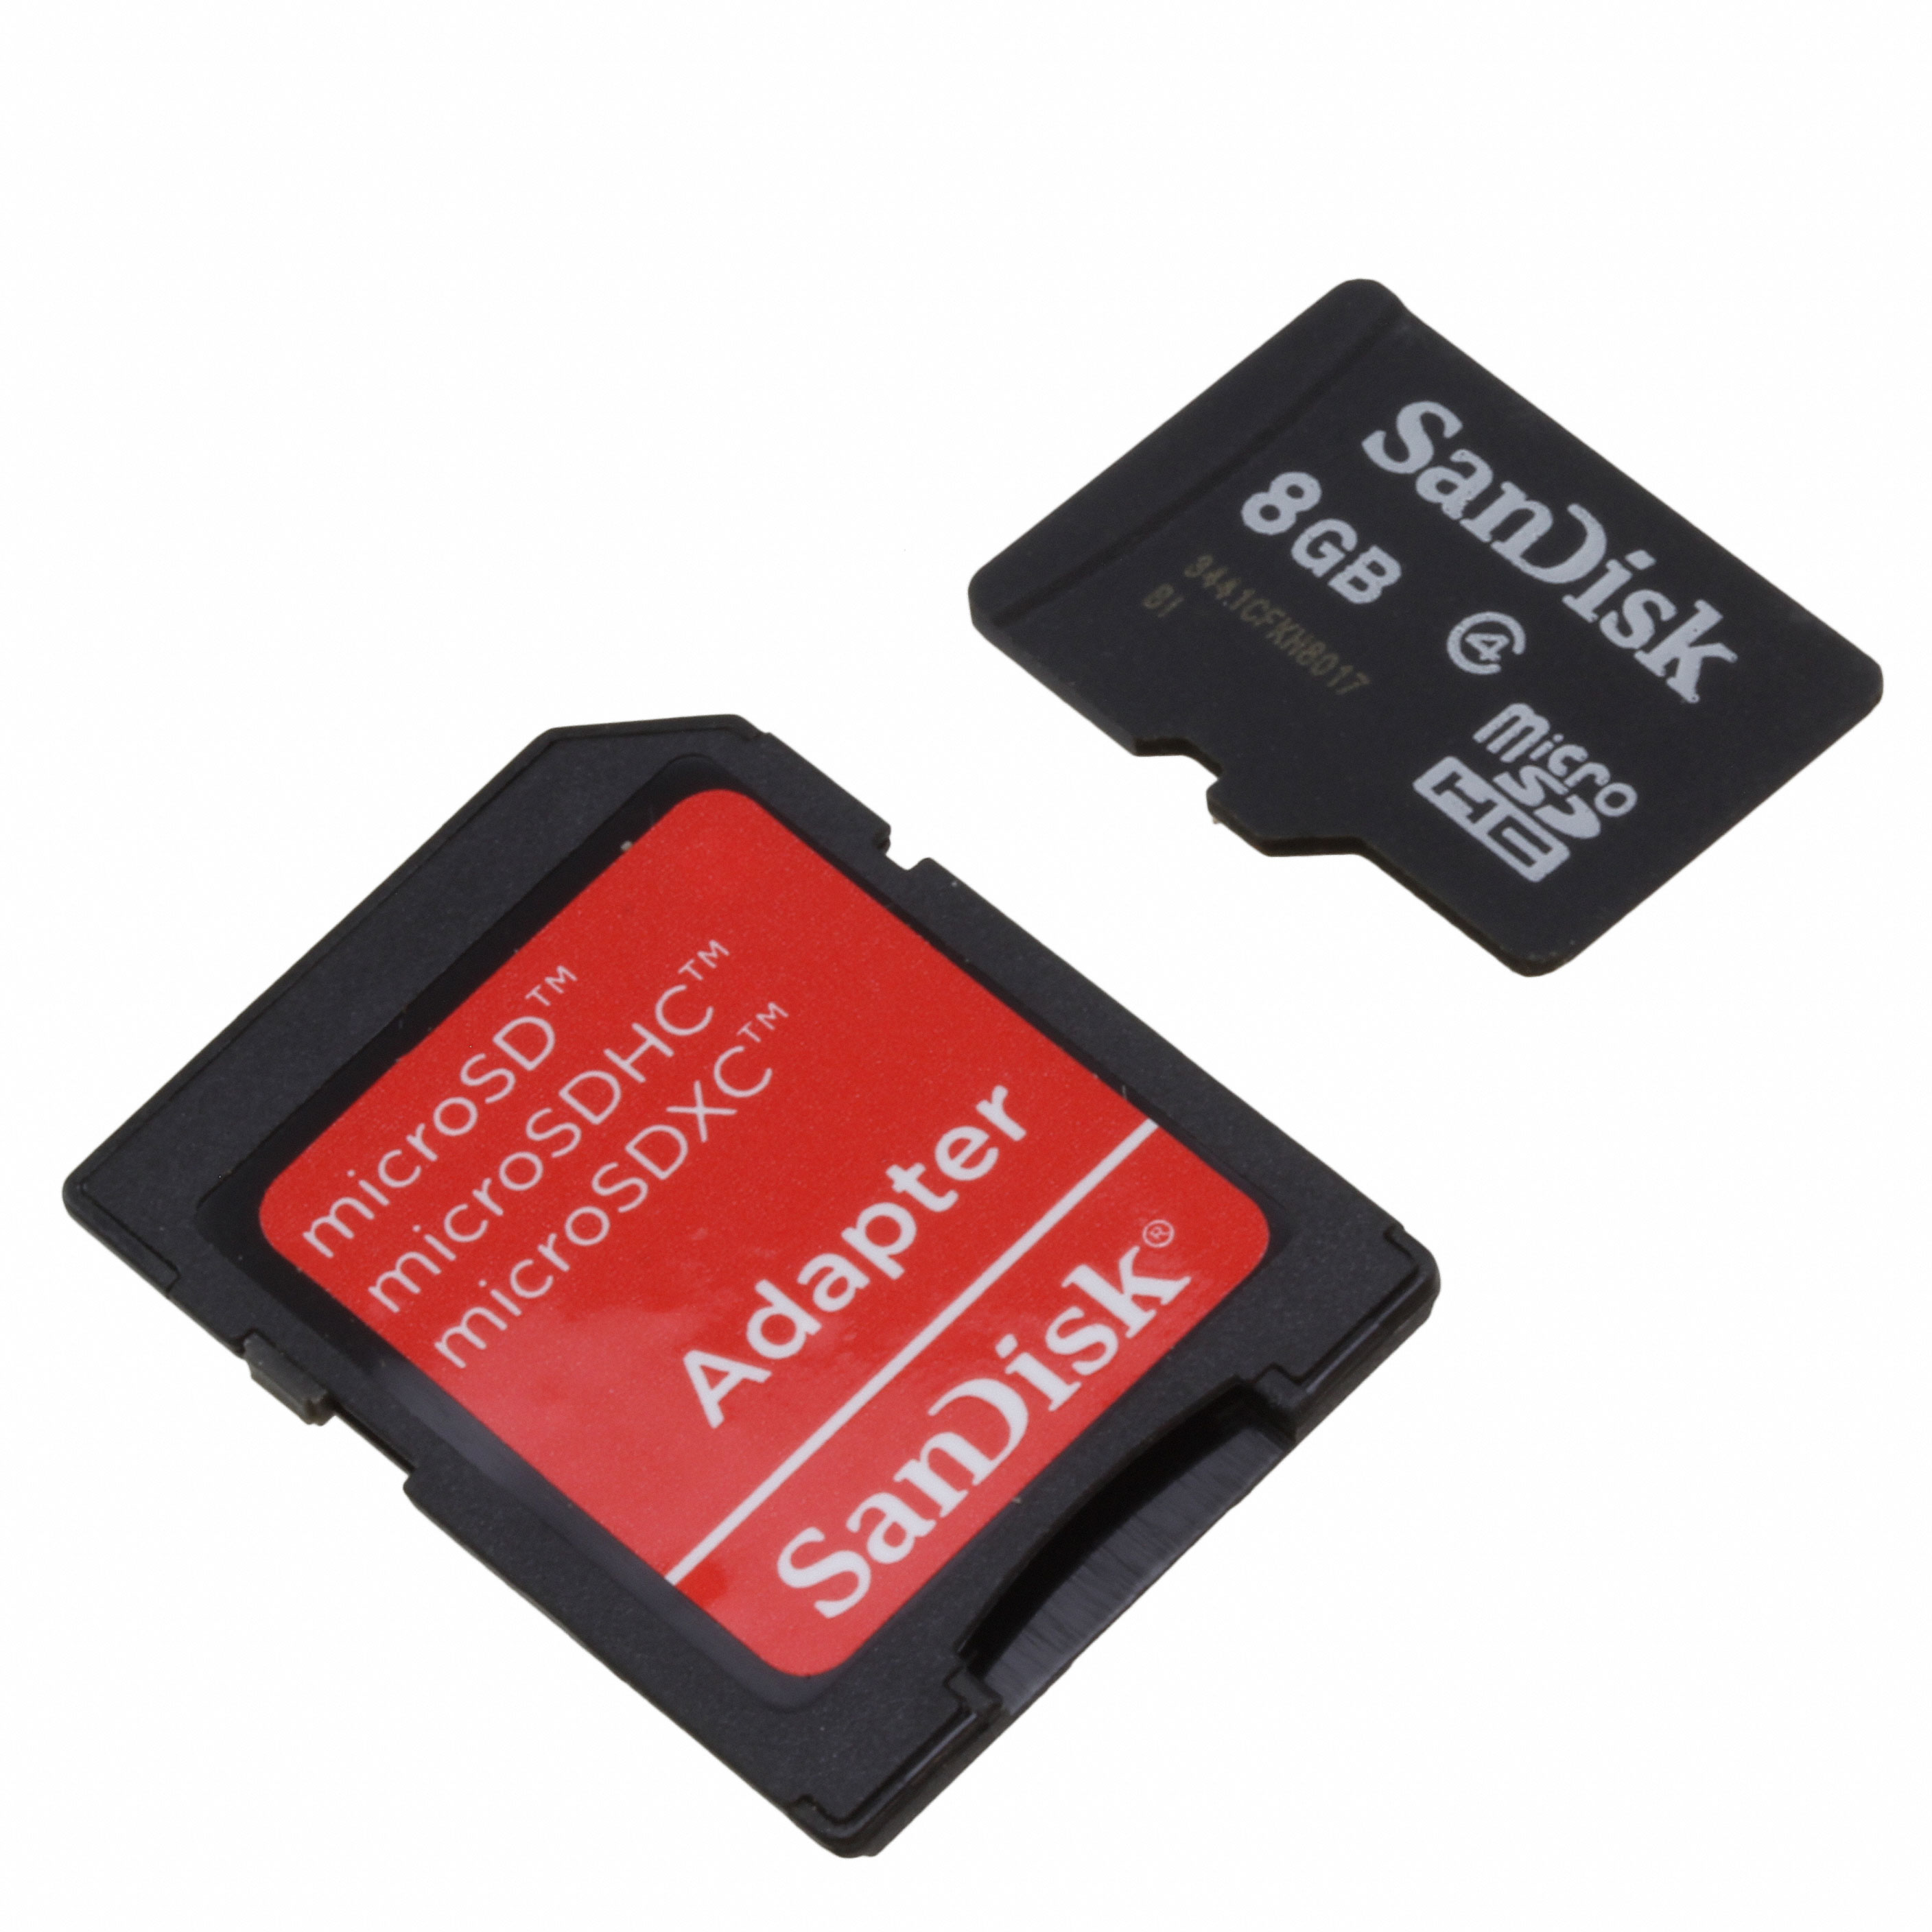 【MIKROE-1283】MICROSD CARD 8GB WITH ADAPTER